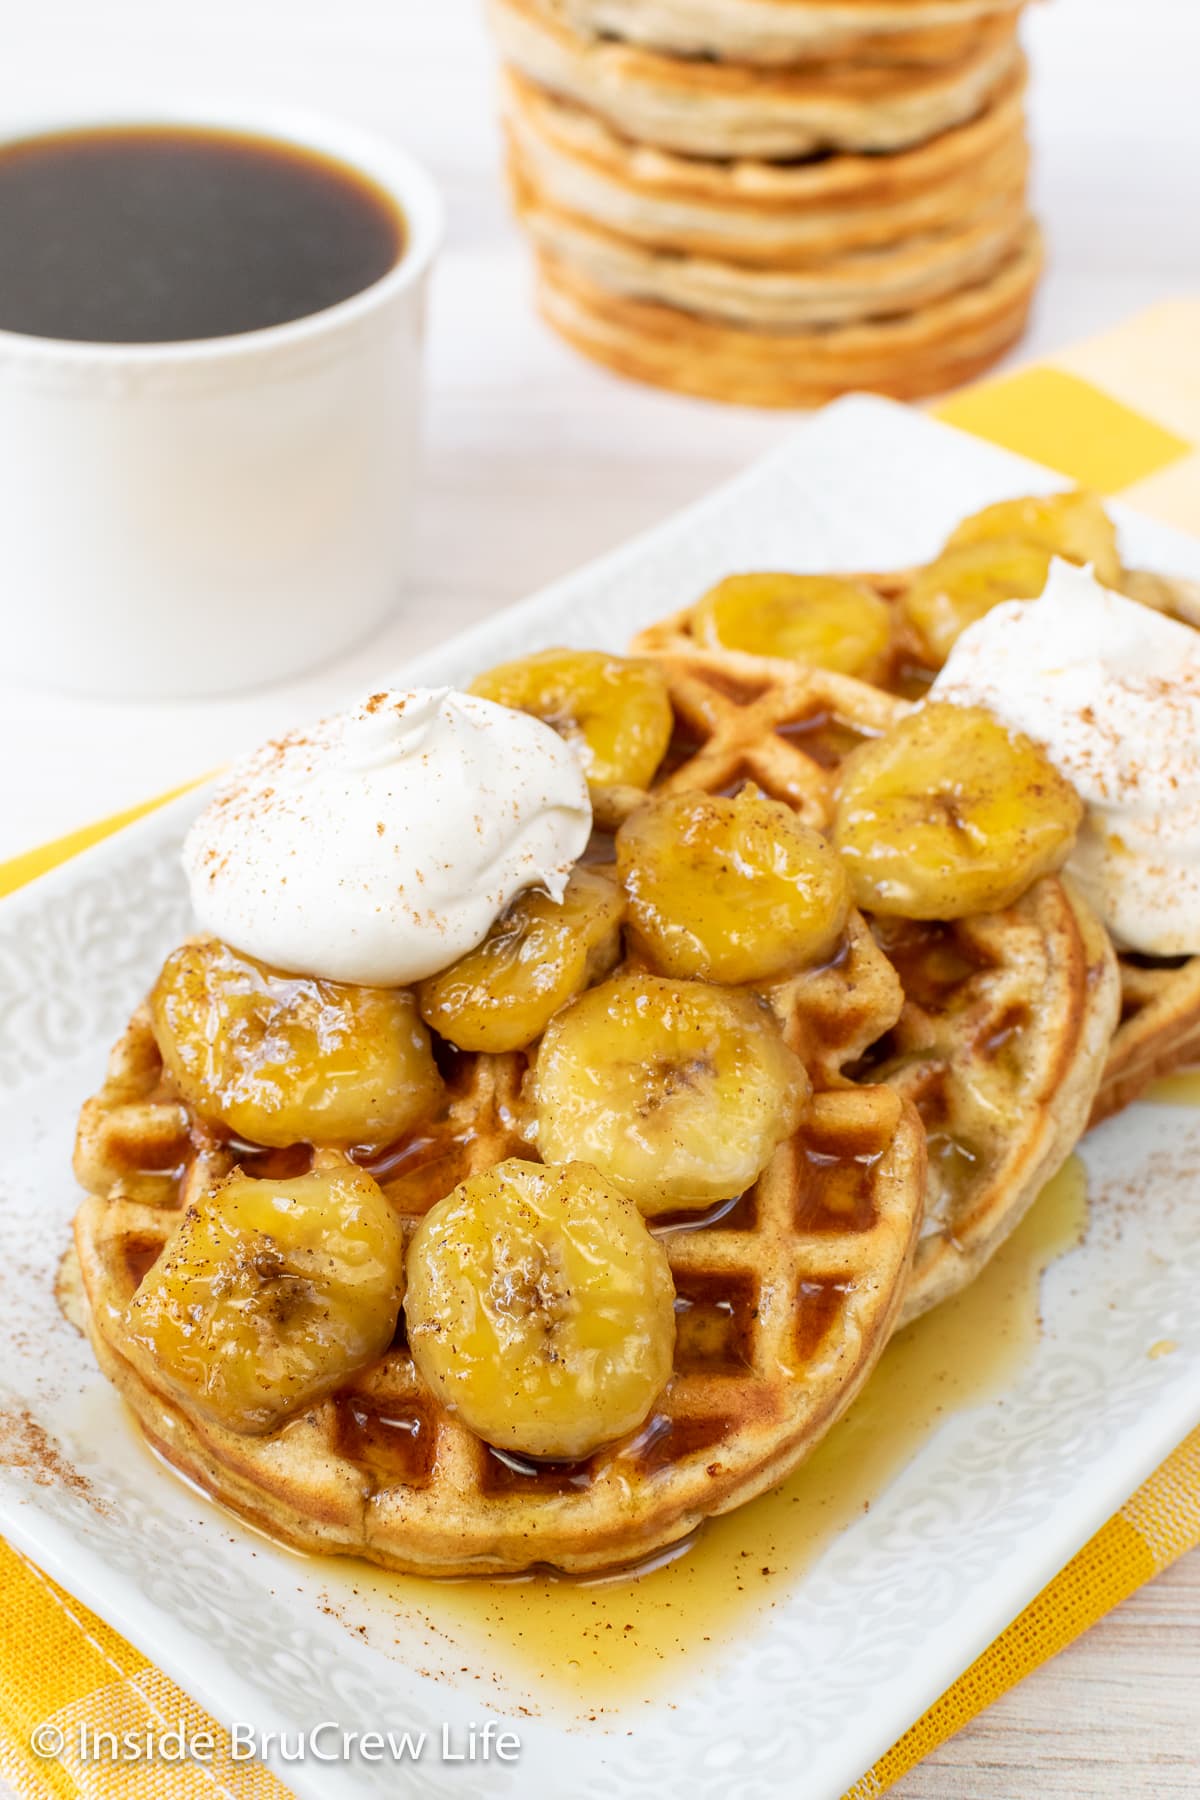 Waffles on a white plate topped with syrup, bananas, and whipped cream.